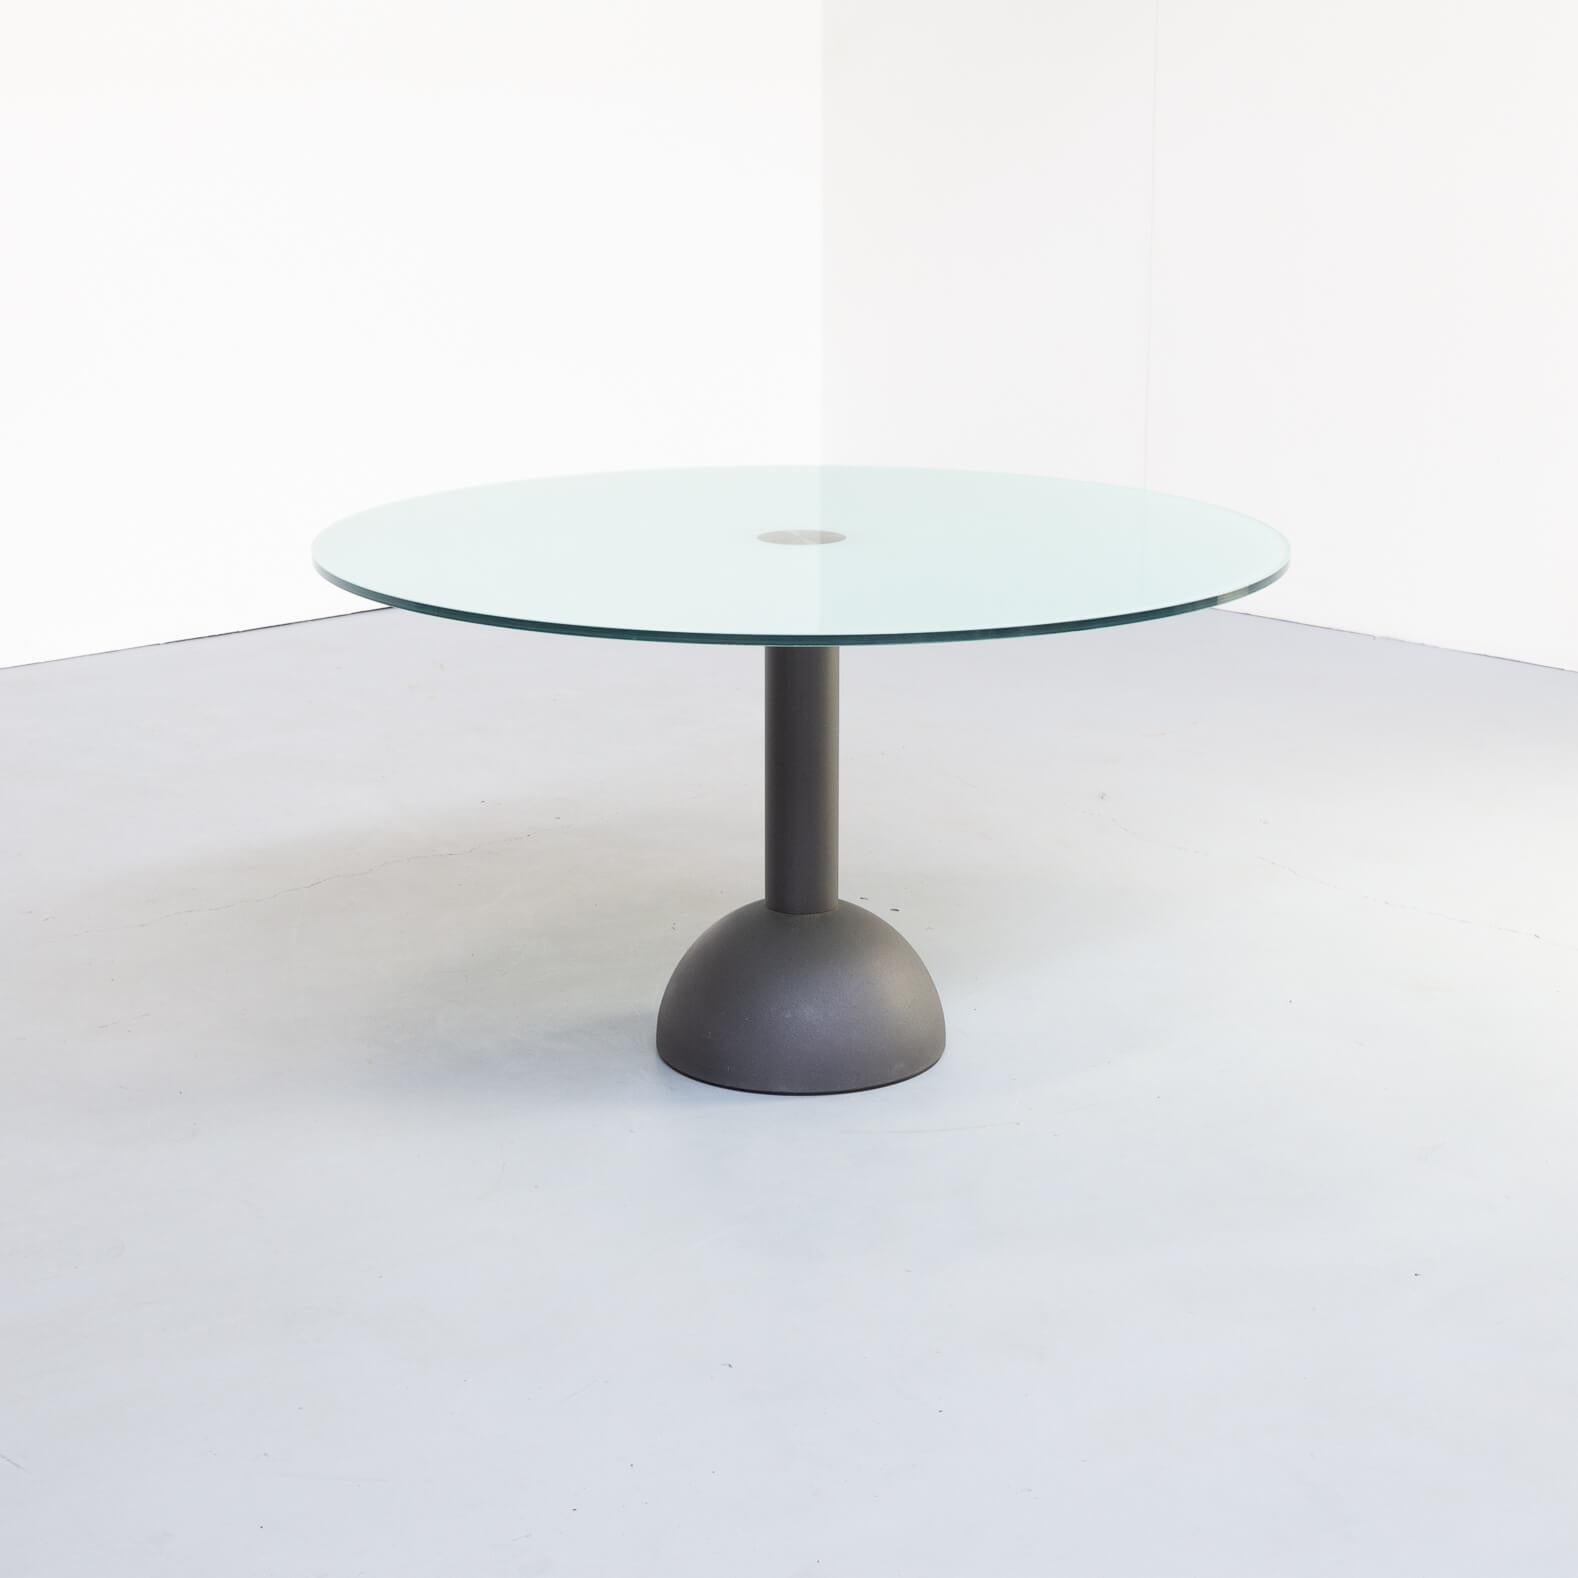 Beautiful 1980s design by Massimo and Lella Vignelli for Poltrona Frau. Firm round dining table on a cast iron foot with glass tabletop. Good condition consistent with age and use.